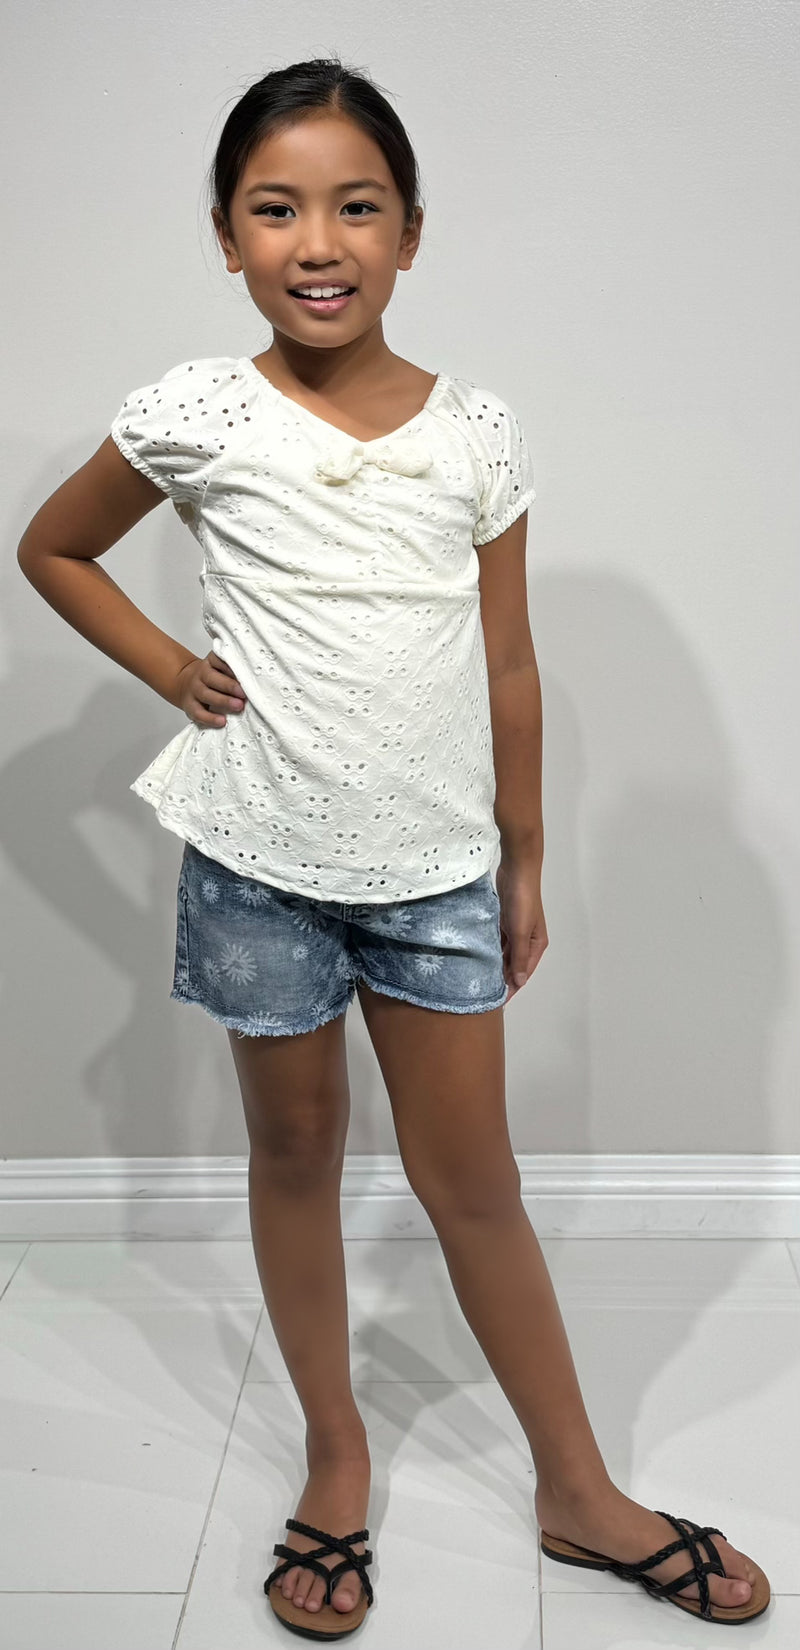 Jeans Warehouse Hawaii - S/S SOLID TOPS 7-16 - STAY THERE TOP | KIDS SIZE 7-16 | By STAR RIDE KIDS